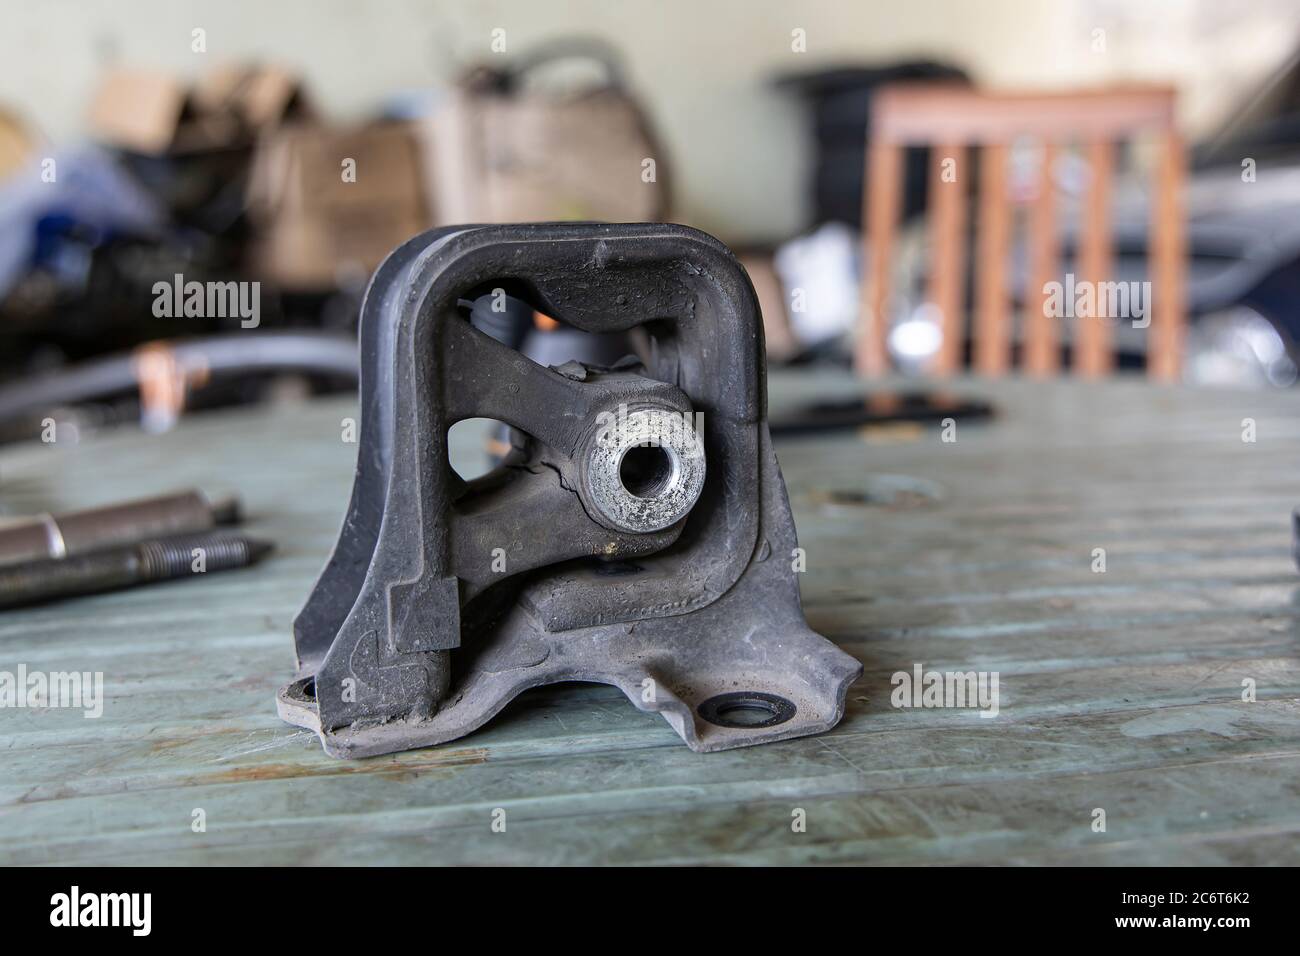 Old rubber engine mount with tools on the table background. Stock Photo